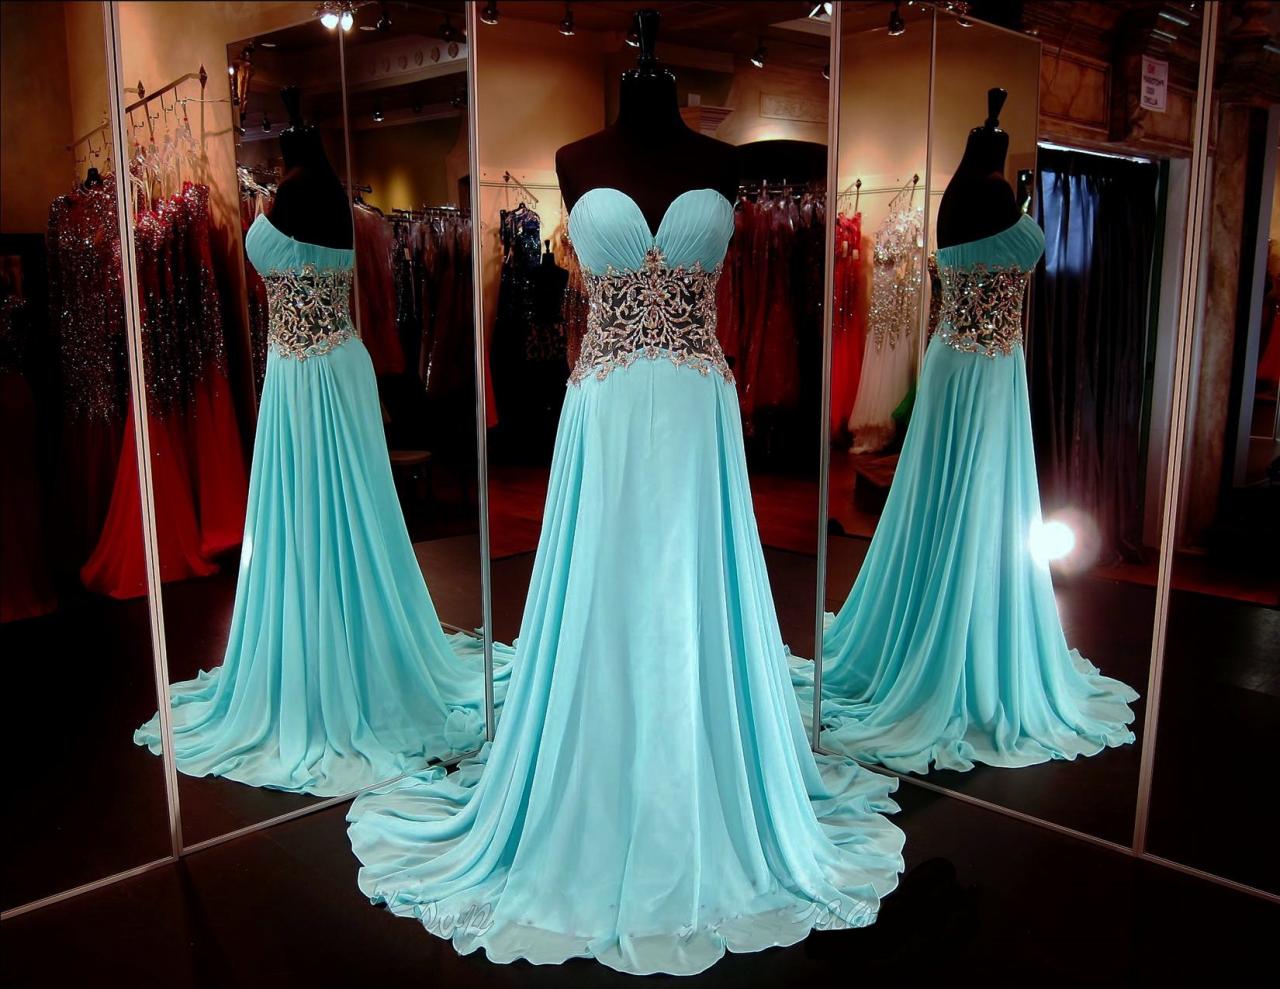 Sexy Sweetheart A Line Waist With Applique Floor Length Chiffon Evening Dress Prom Dresses Party Dresses,2018 Plus Size Women Gowns , Girls